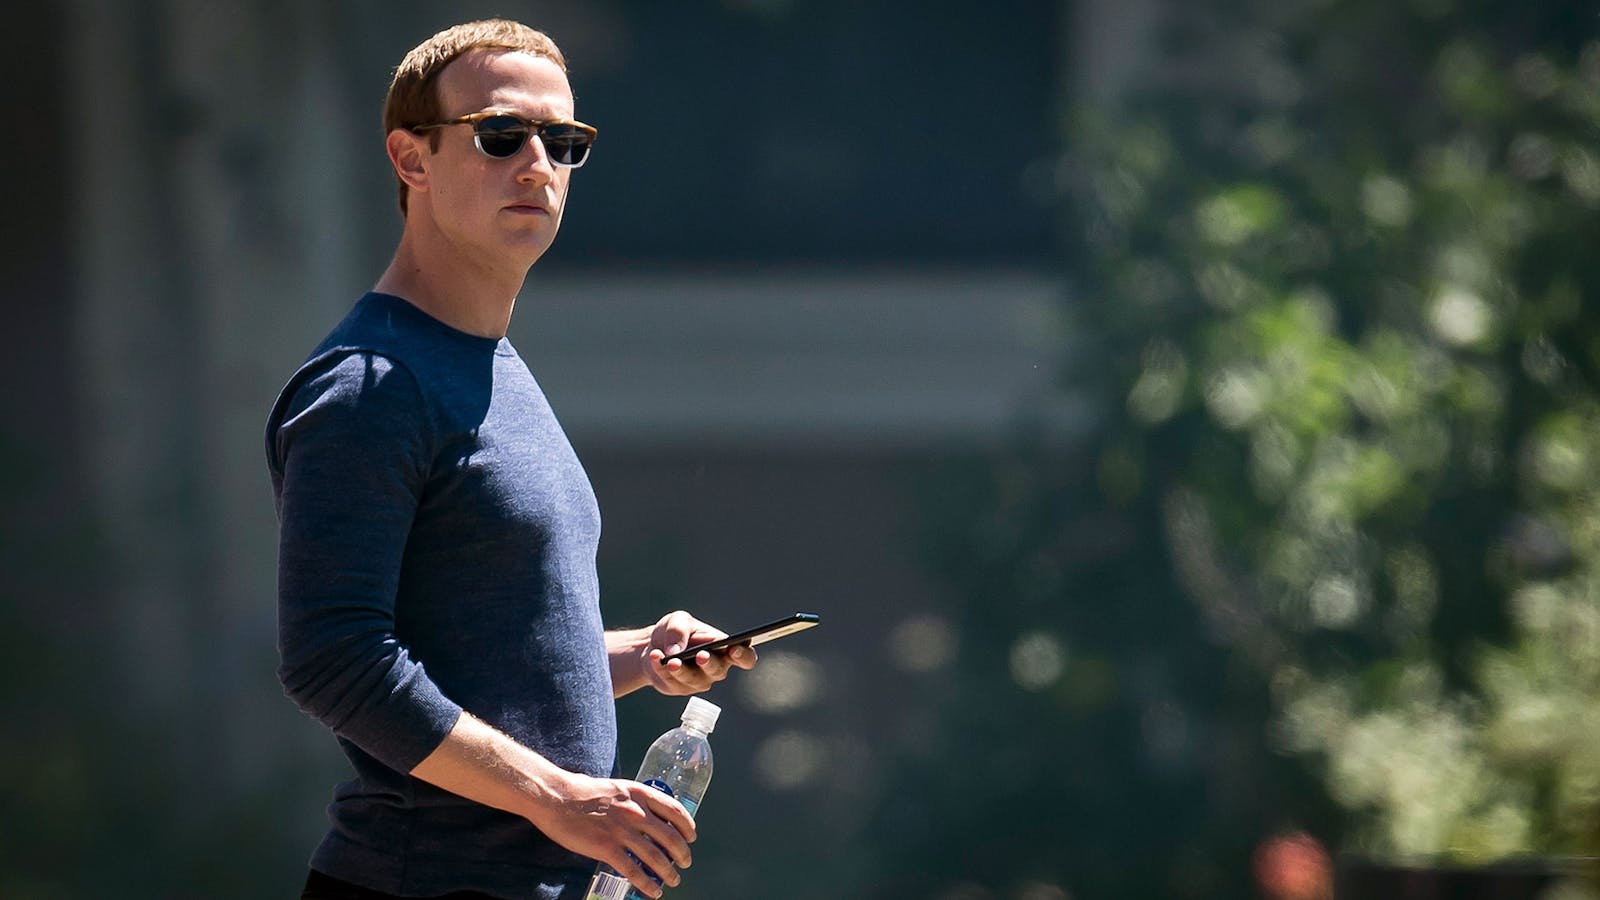 Facebook CEO Mark Zuckerberg last week at the Allen & Co. conference in Sun Valley, Idaho. Photo: Bloomberg